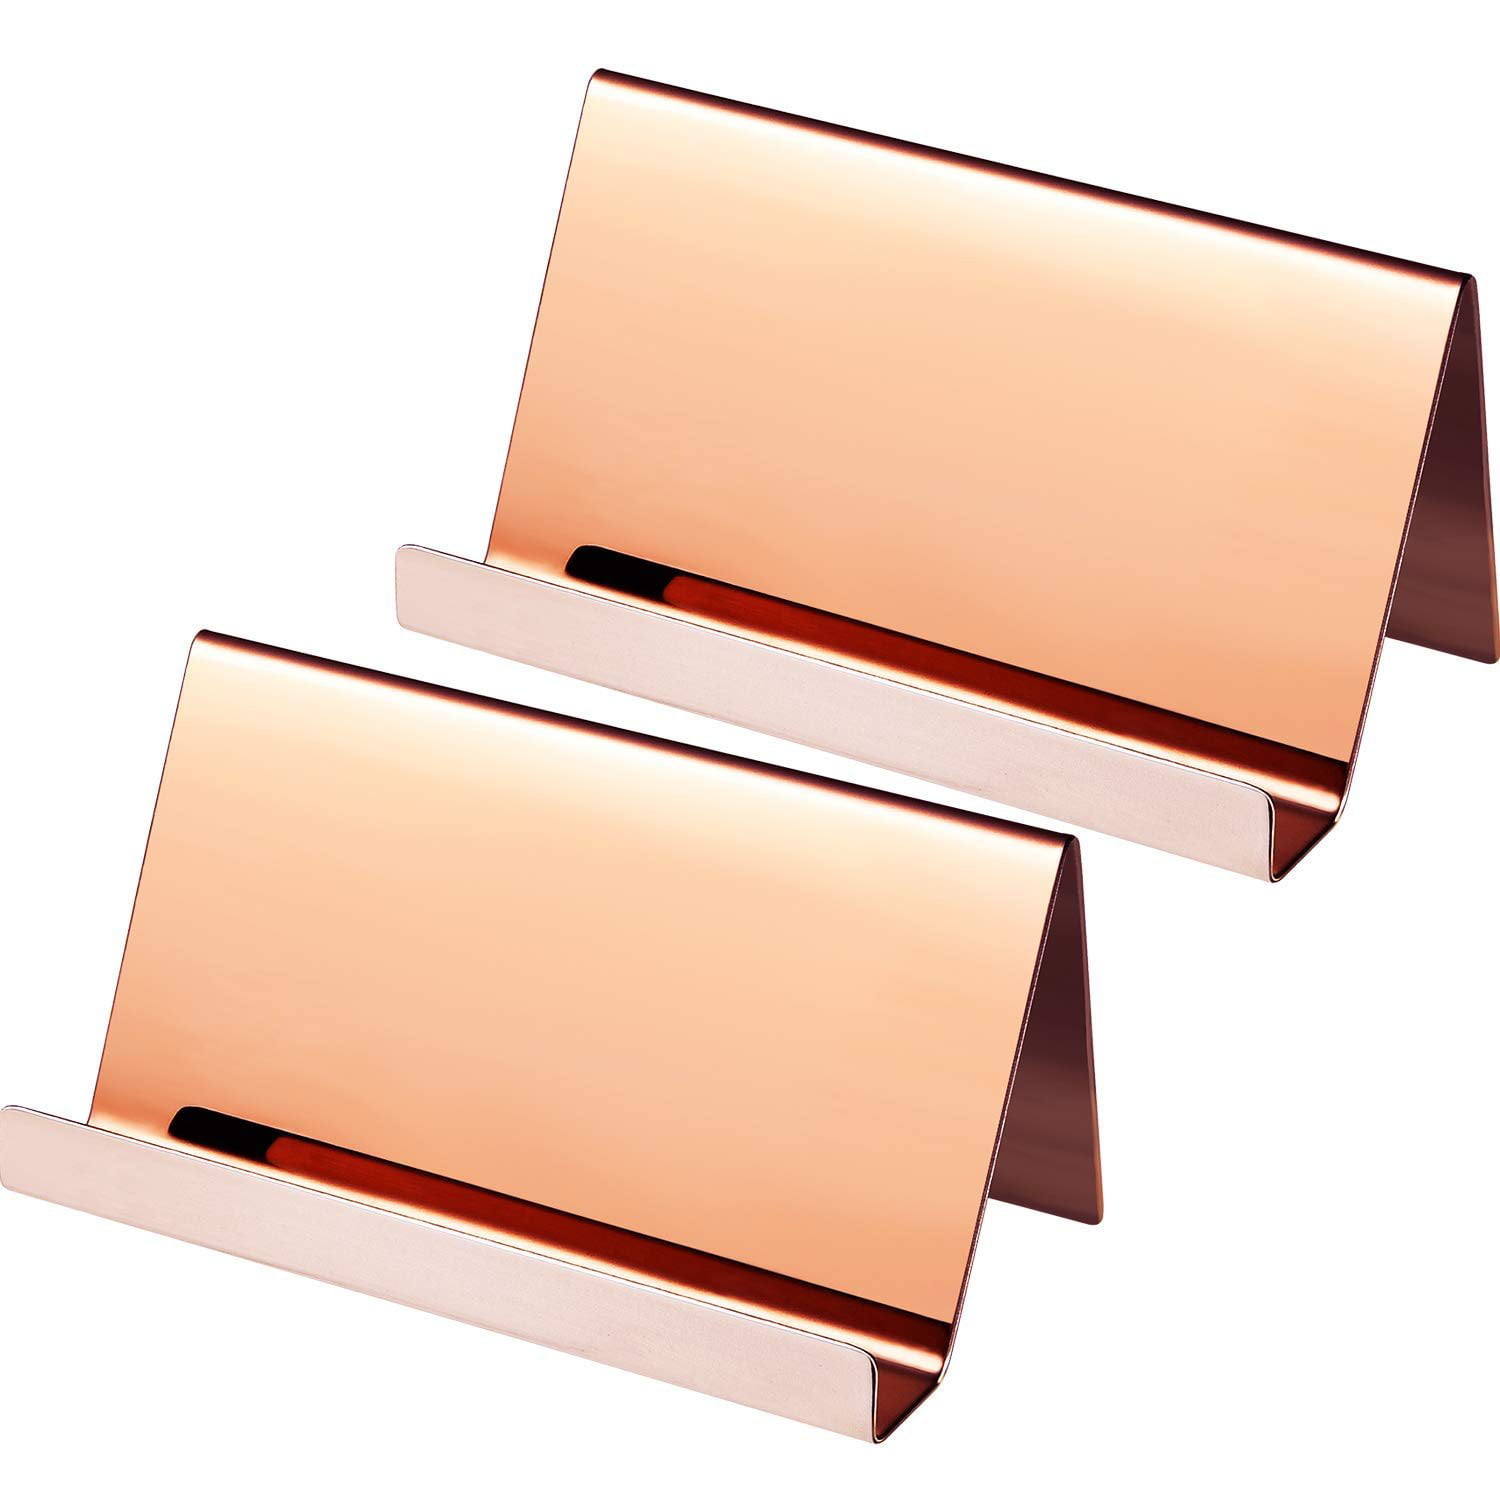 YOBANSA Stainless Steel Rose Gold Business Card Holder Credit Card Holder Name Card Holder Business Card Case for Men and Women Rose Gold 02